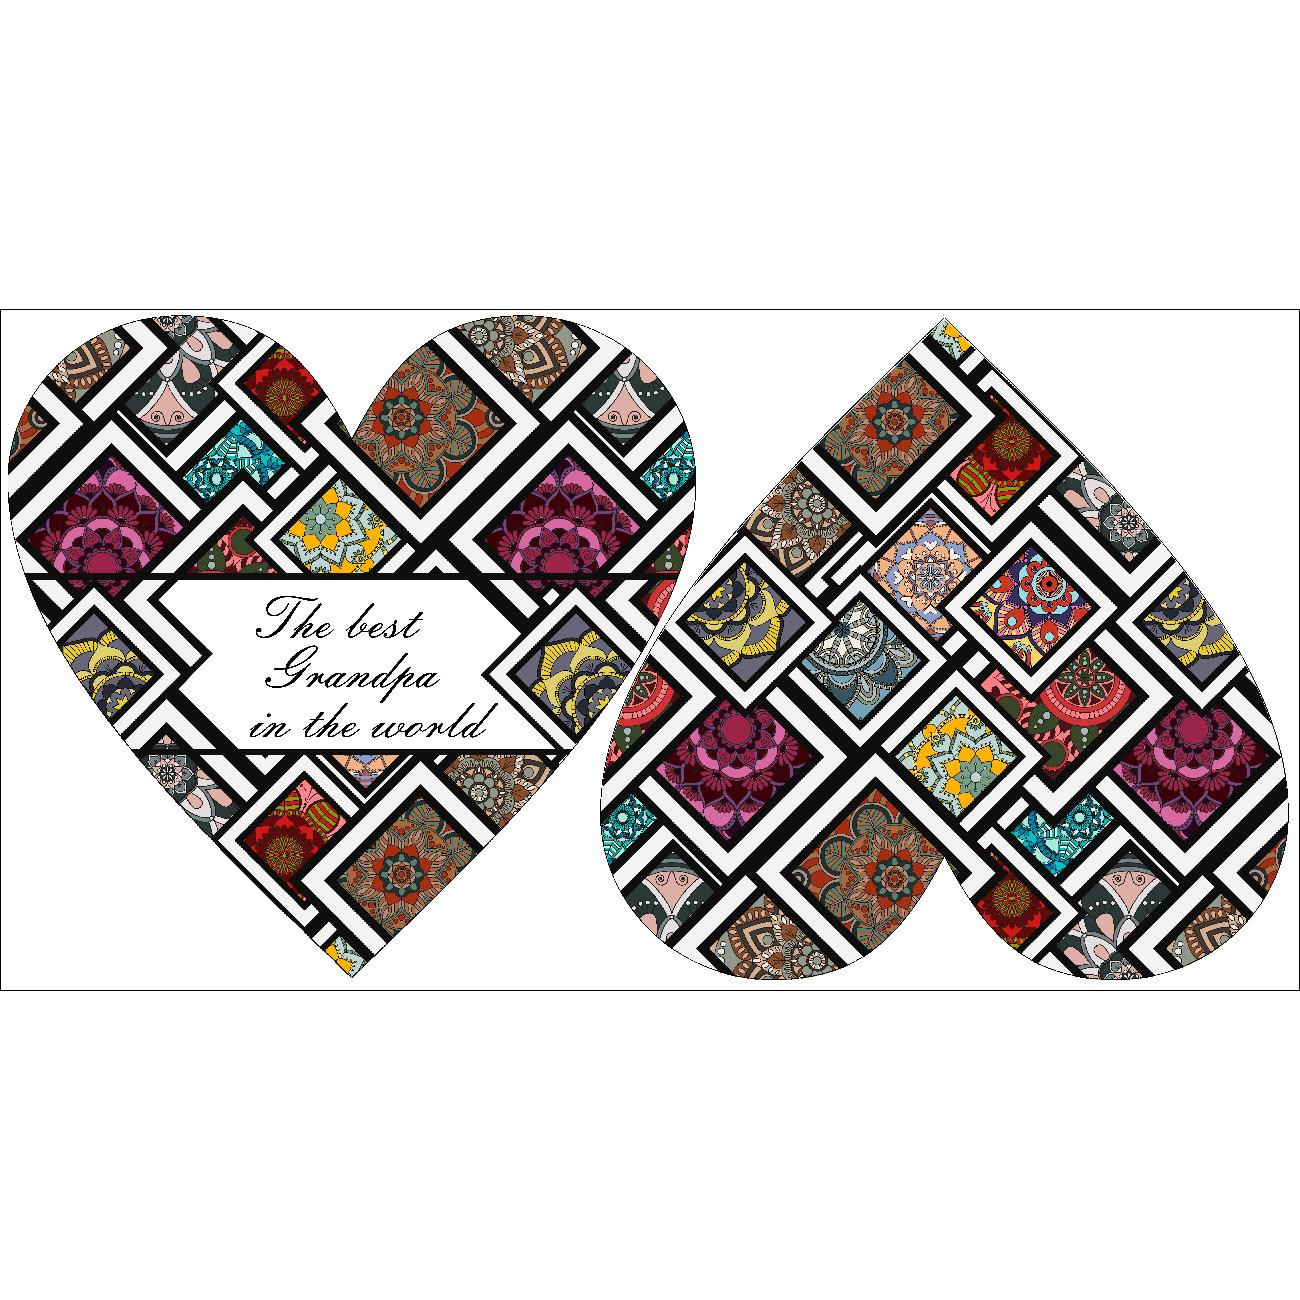 DECORATIVE PILLOW HEART - The Best Grandpa in the World / STAINED GLASS